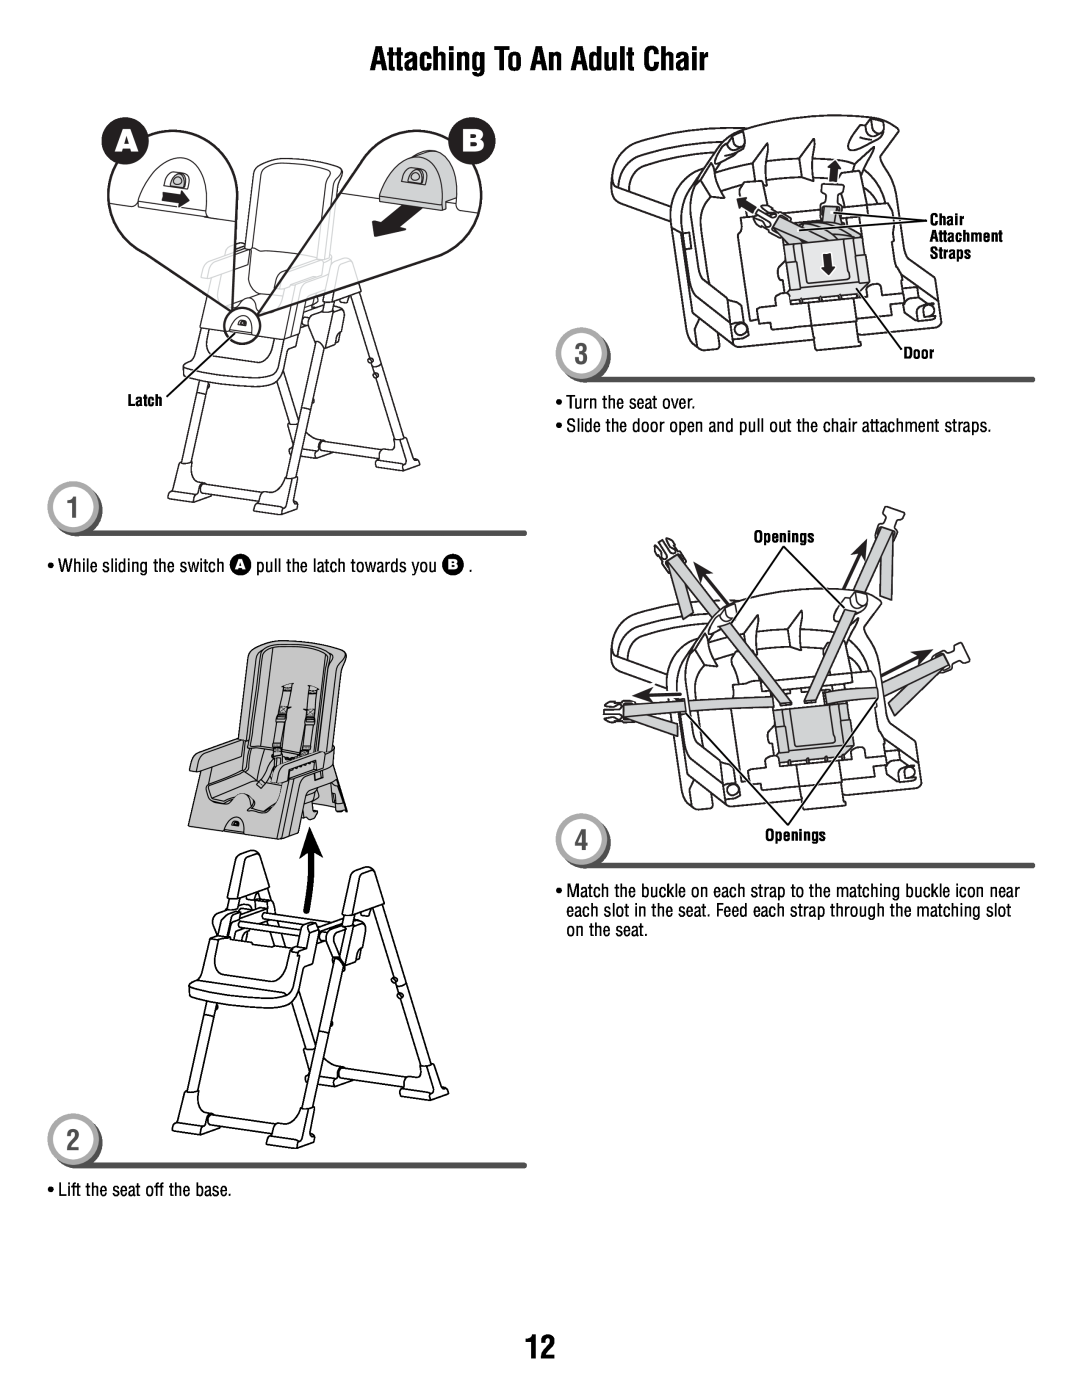 Fisher-Price P9043 manual Attaching To An Adult Chair, Straps, Door, Latch, 4Openings, Turn the seat over, Attachment 